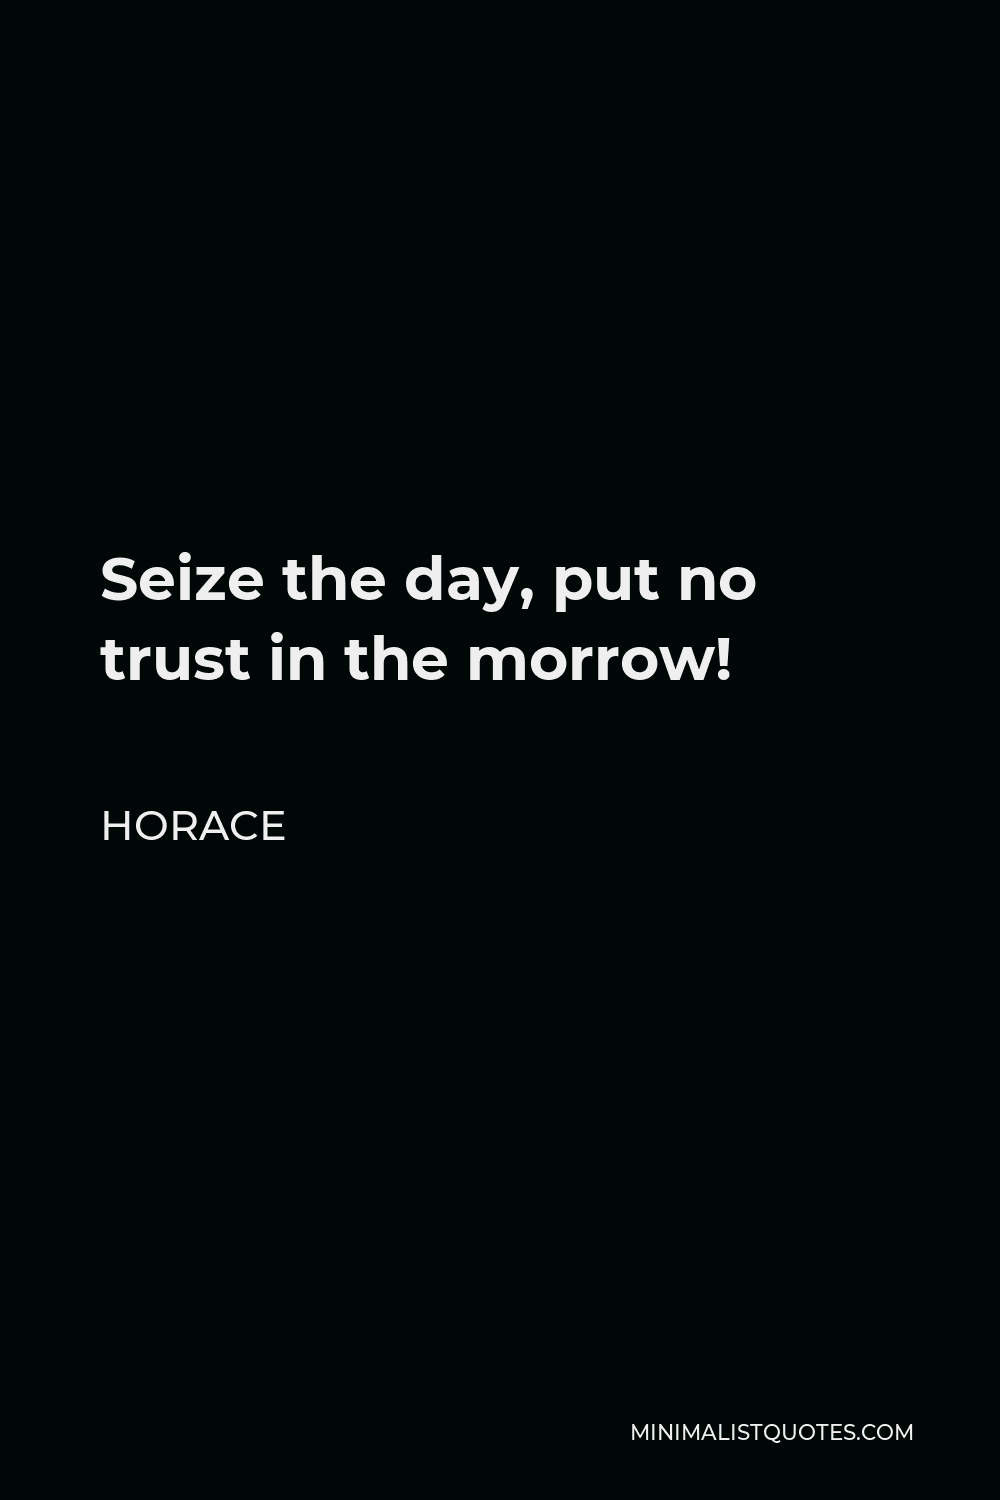 Horace Quote - Seize the day, put no trust in the morrow!